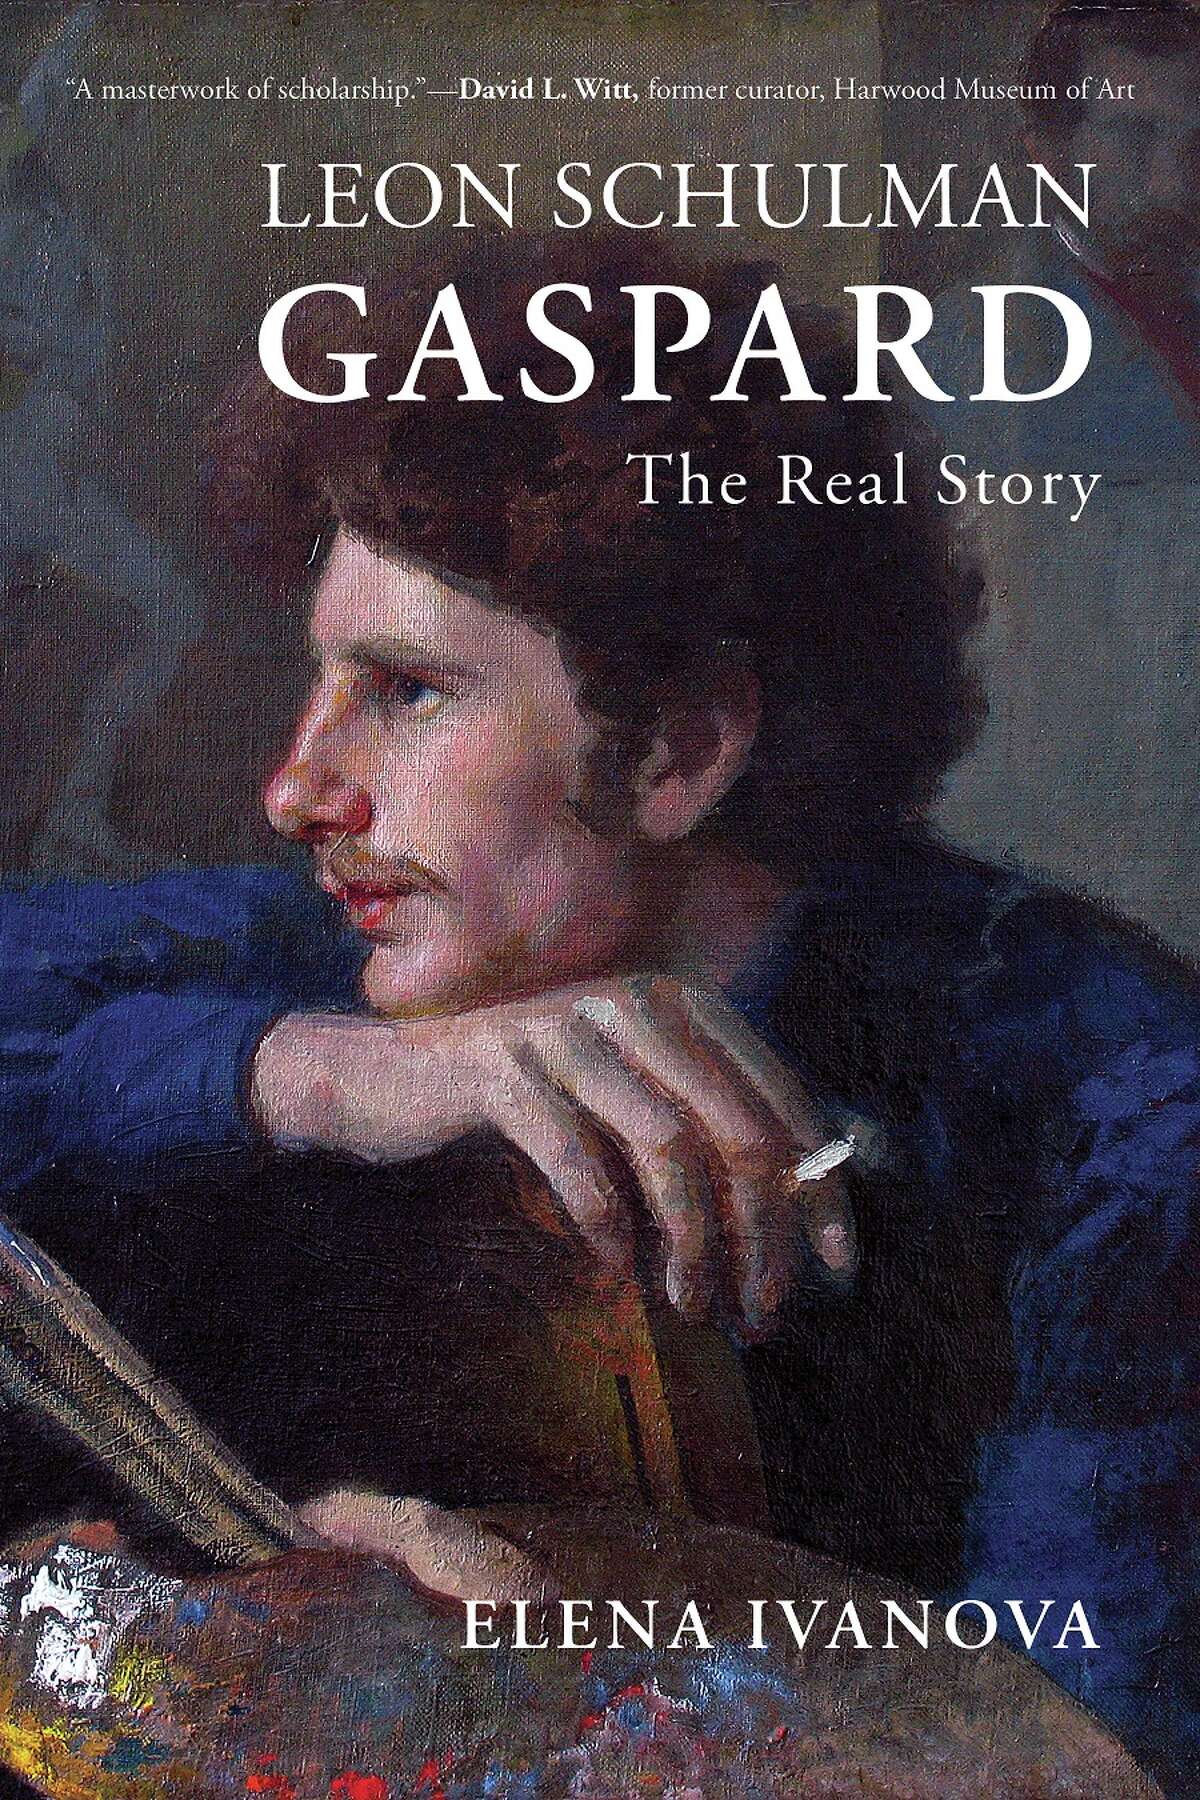 Elena Ivanova has spent more than a decade researching the life of Russian-American artist Leon Schulman Gaspard, trying to separate fact from fiction. The result is “Leon Schulman Gaspard: The Real Story."